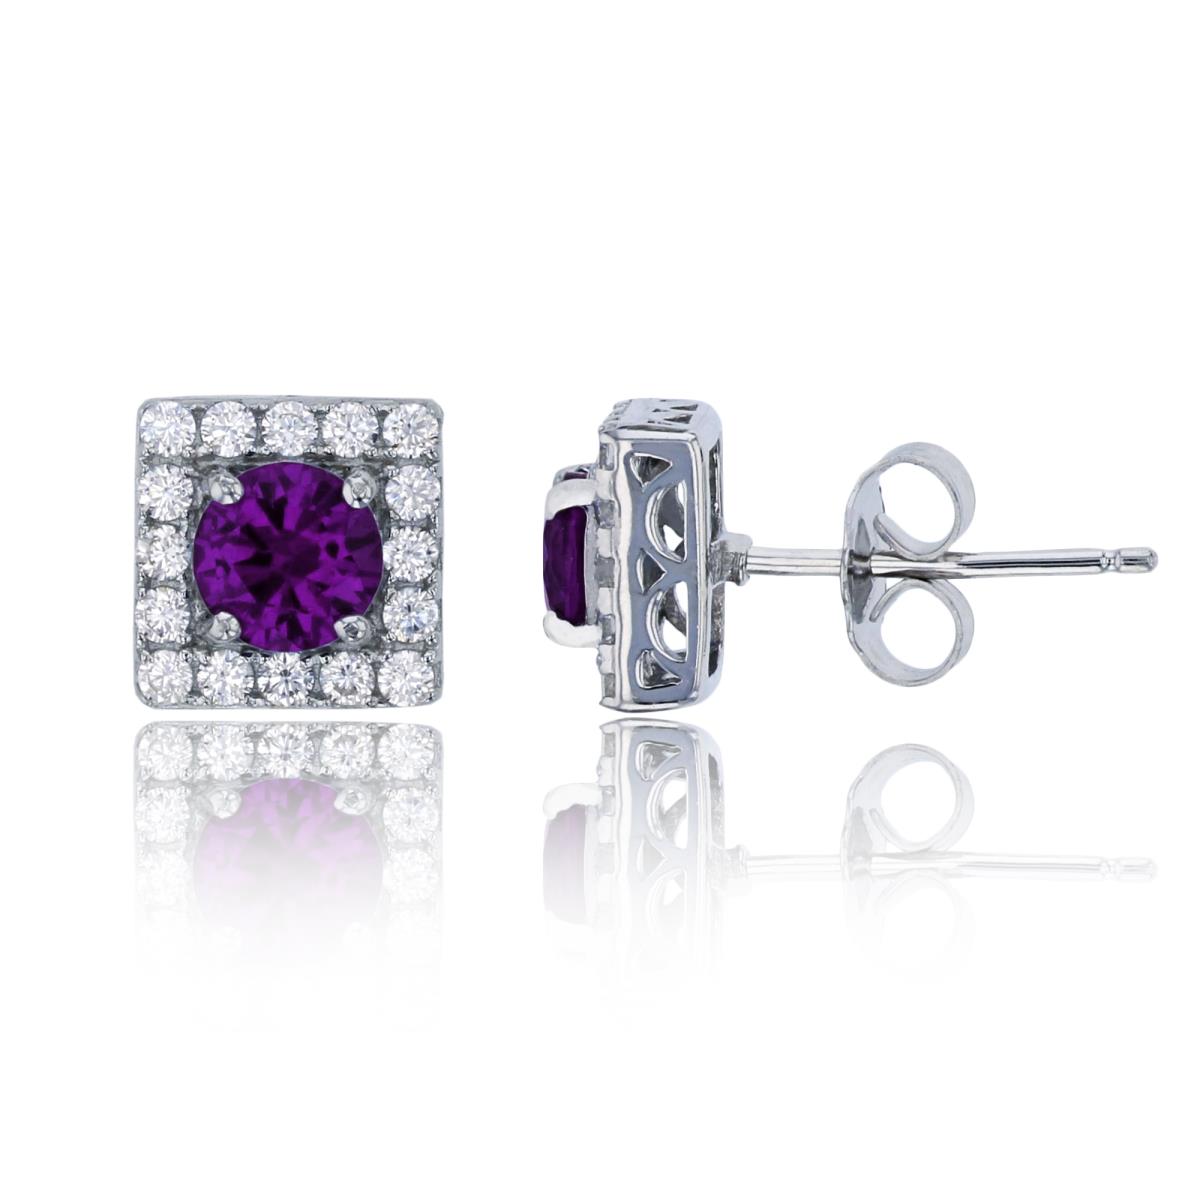 Sterling Silver Rhodium Pave 5mm Rd Amethyst CZ Square Stud Earring